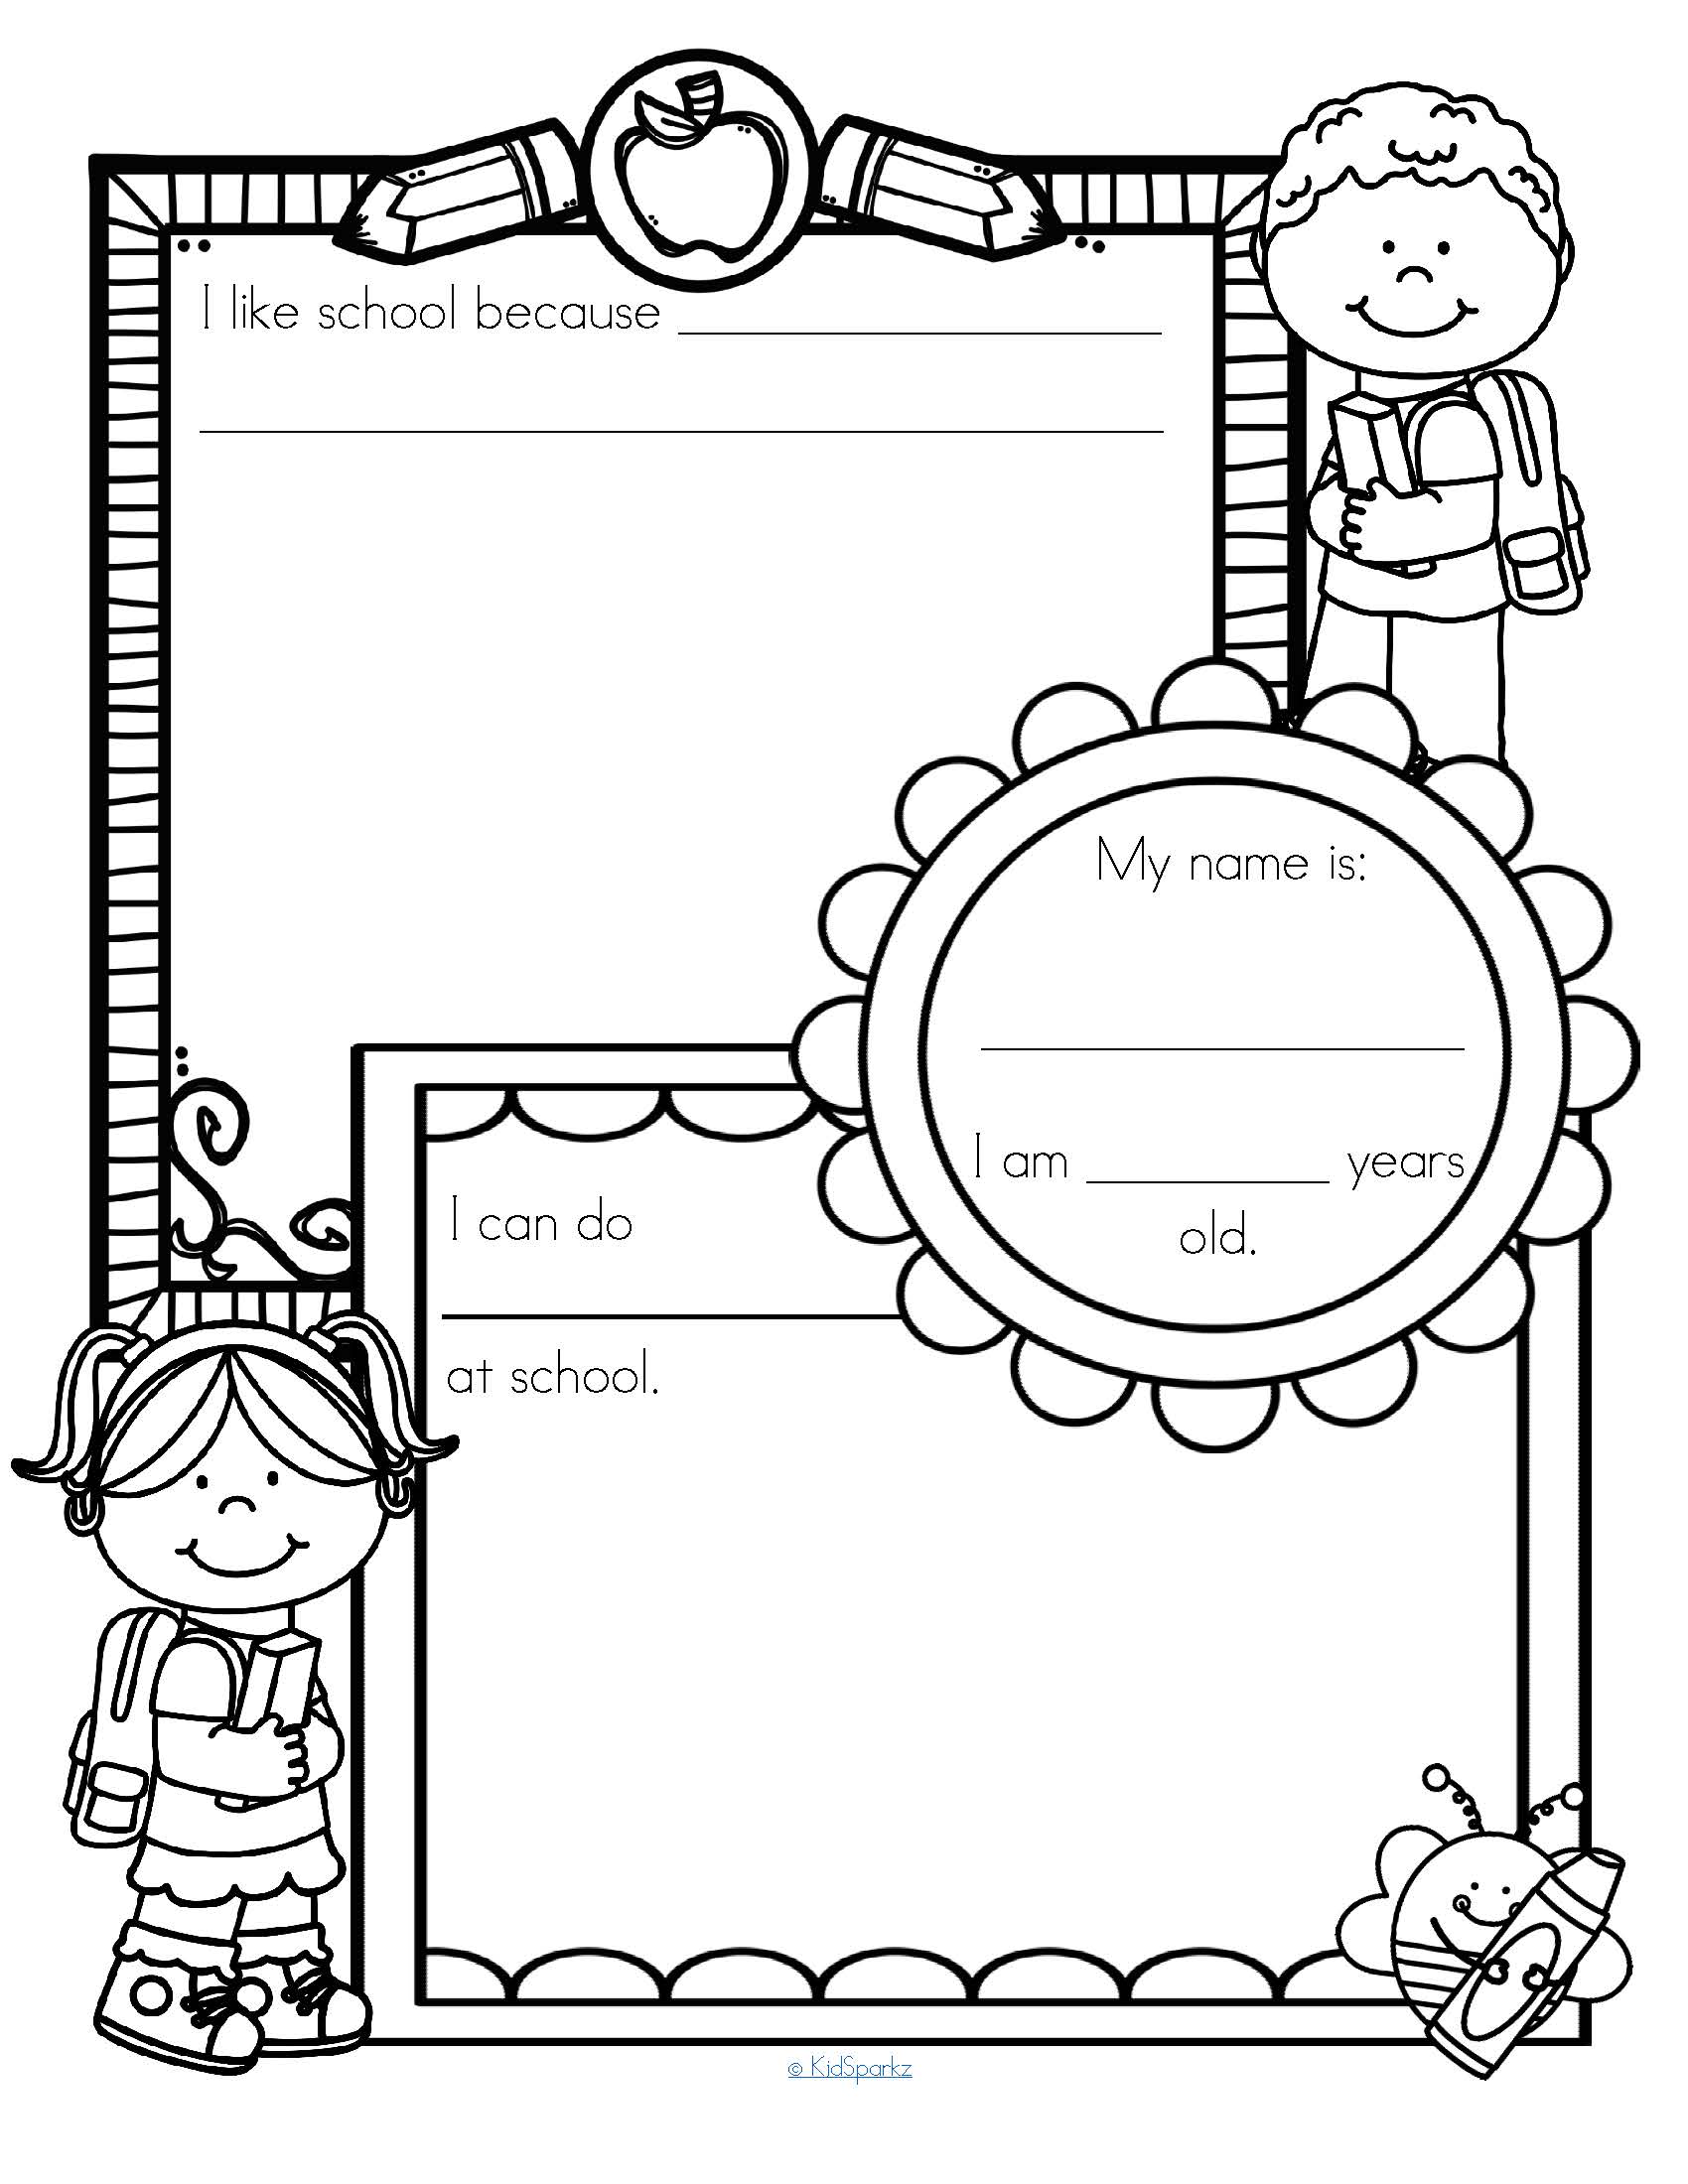 Back to School Printables Pack